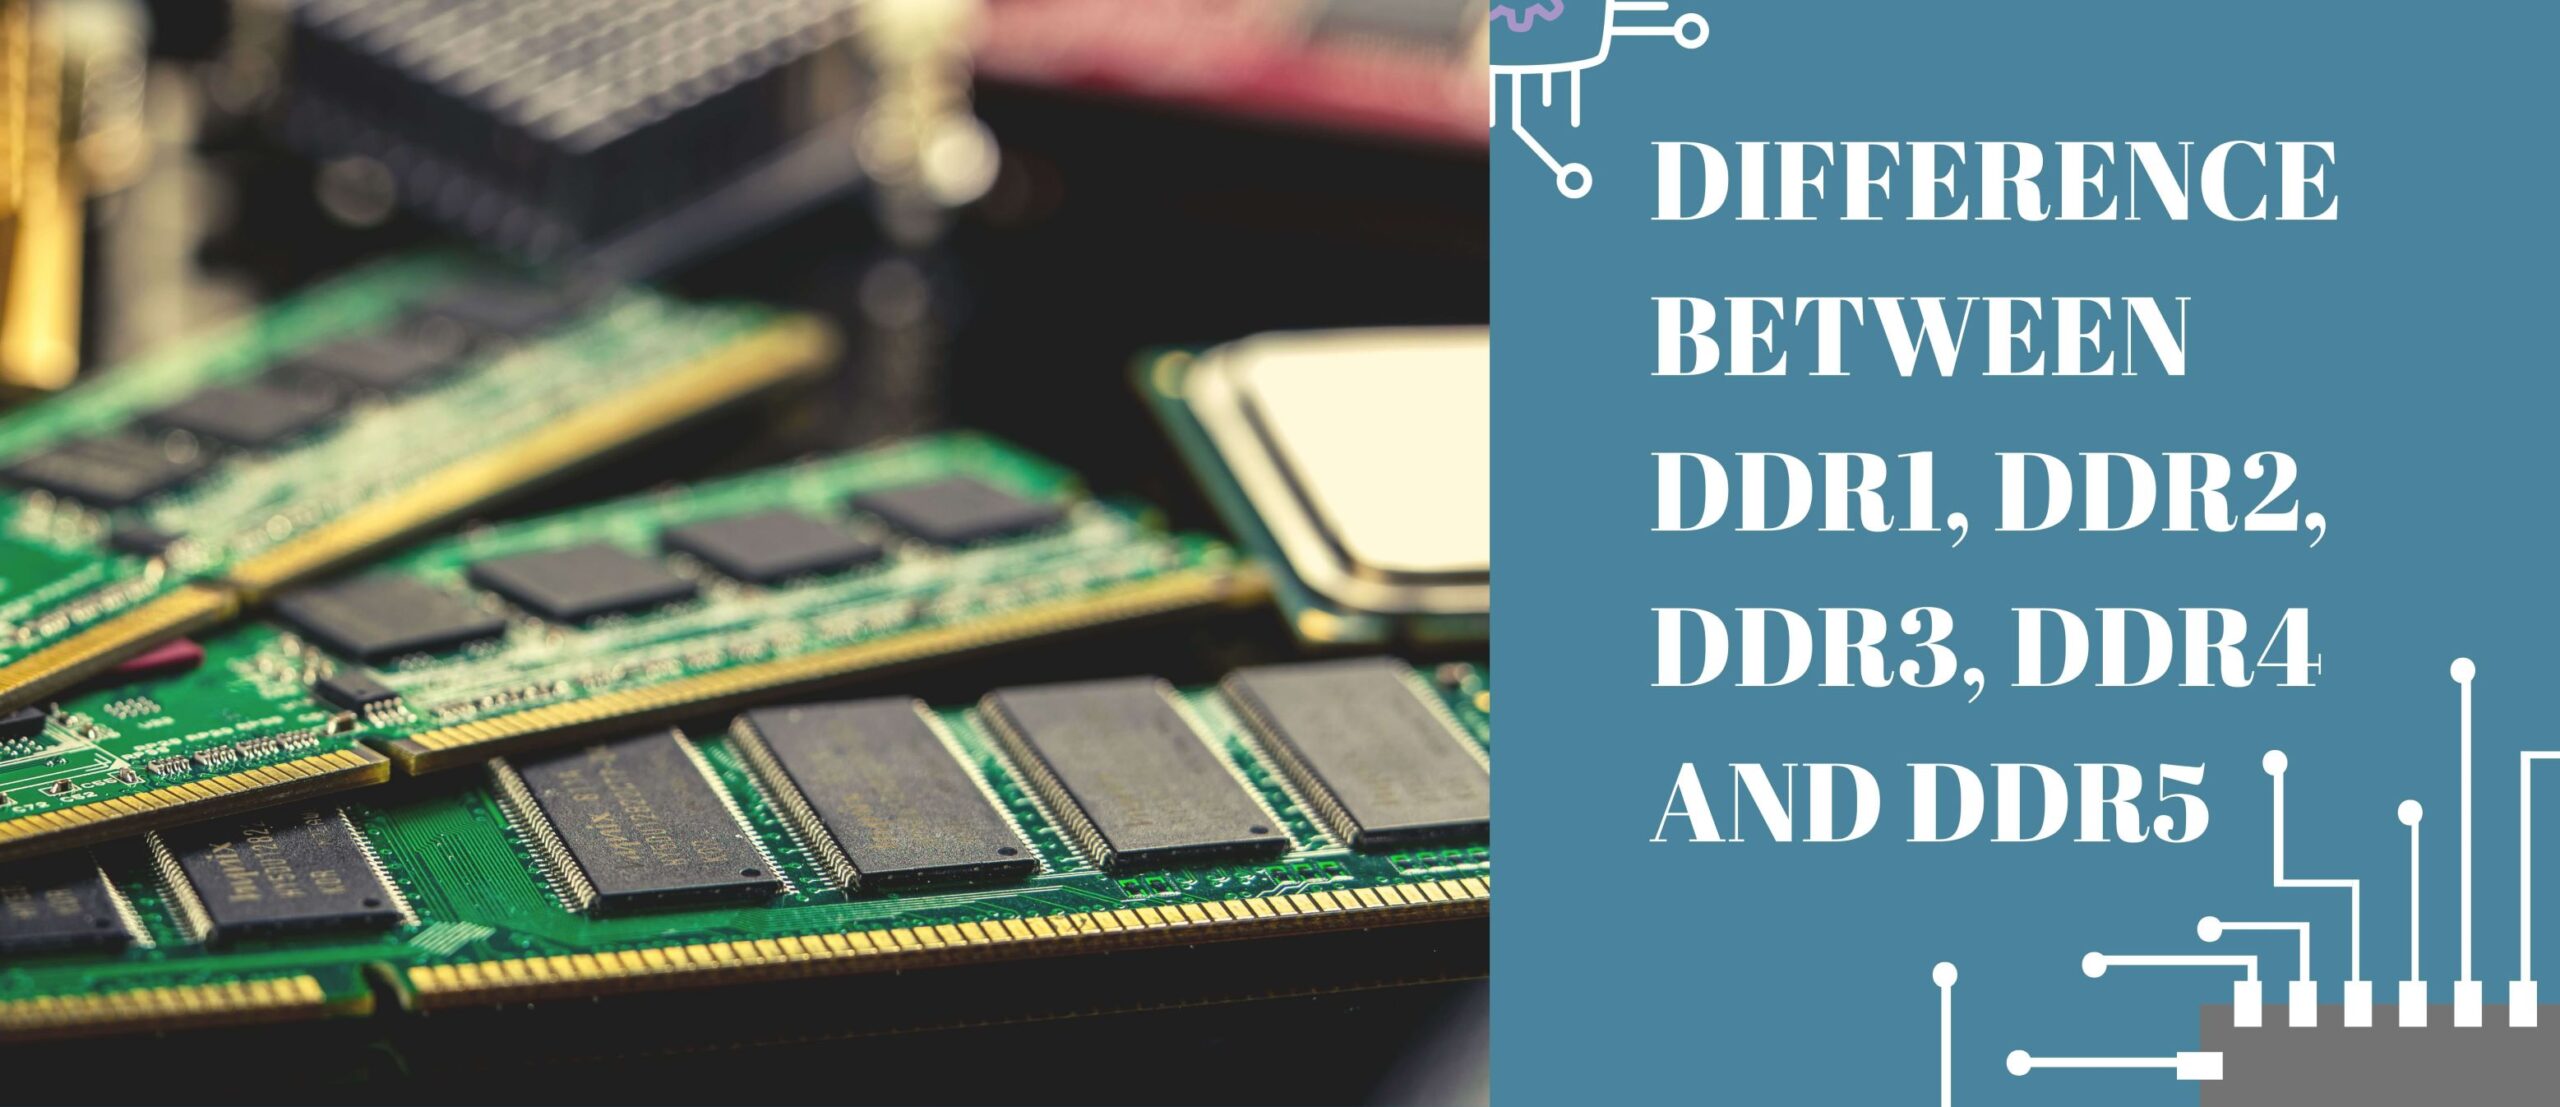 Difference between ddr1, ddr2, ddr3, ddr4 and ddr5 RAM